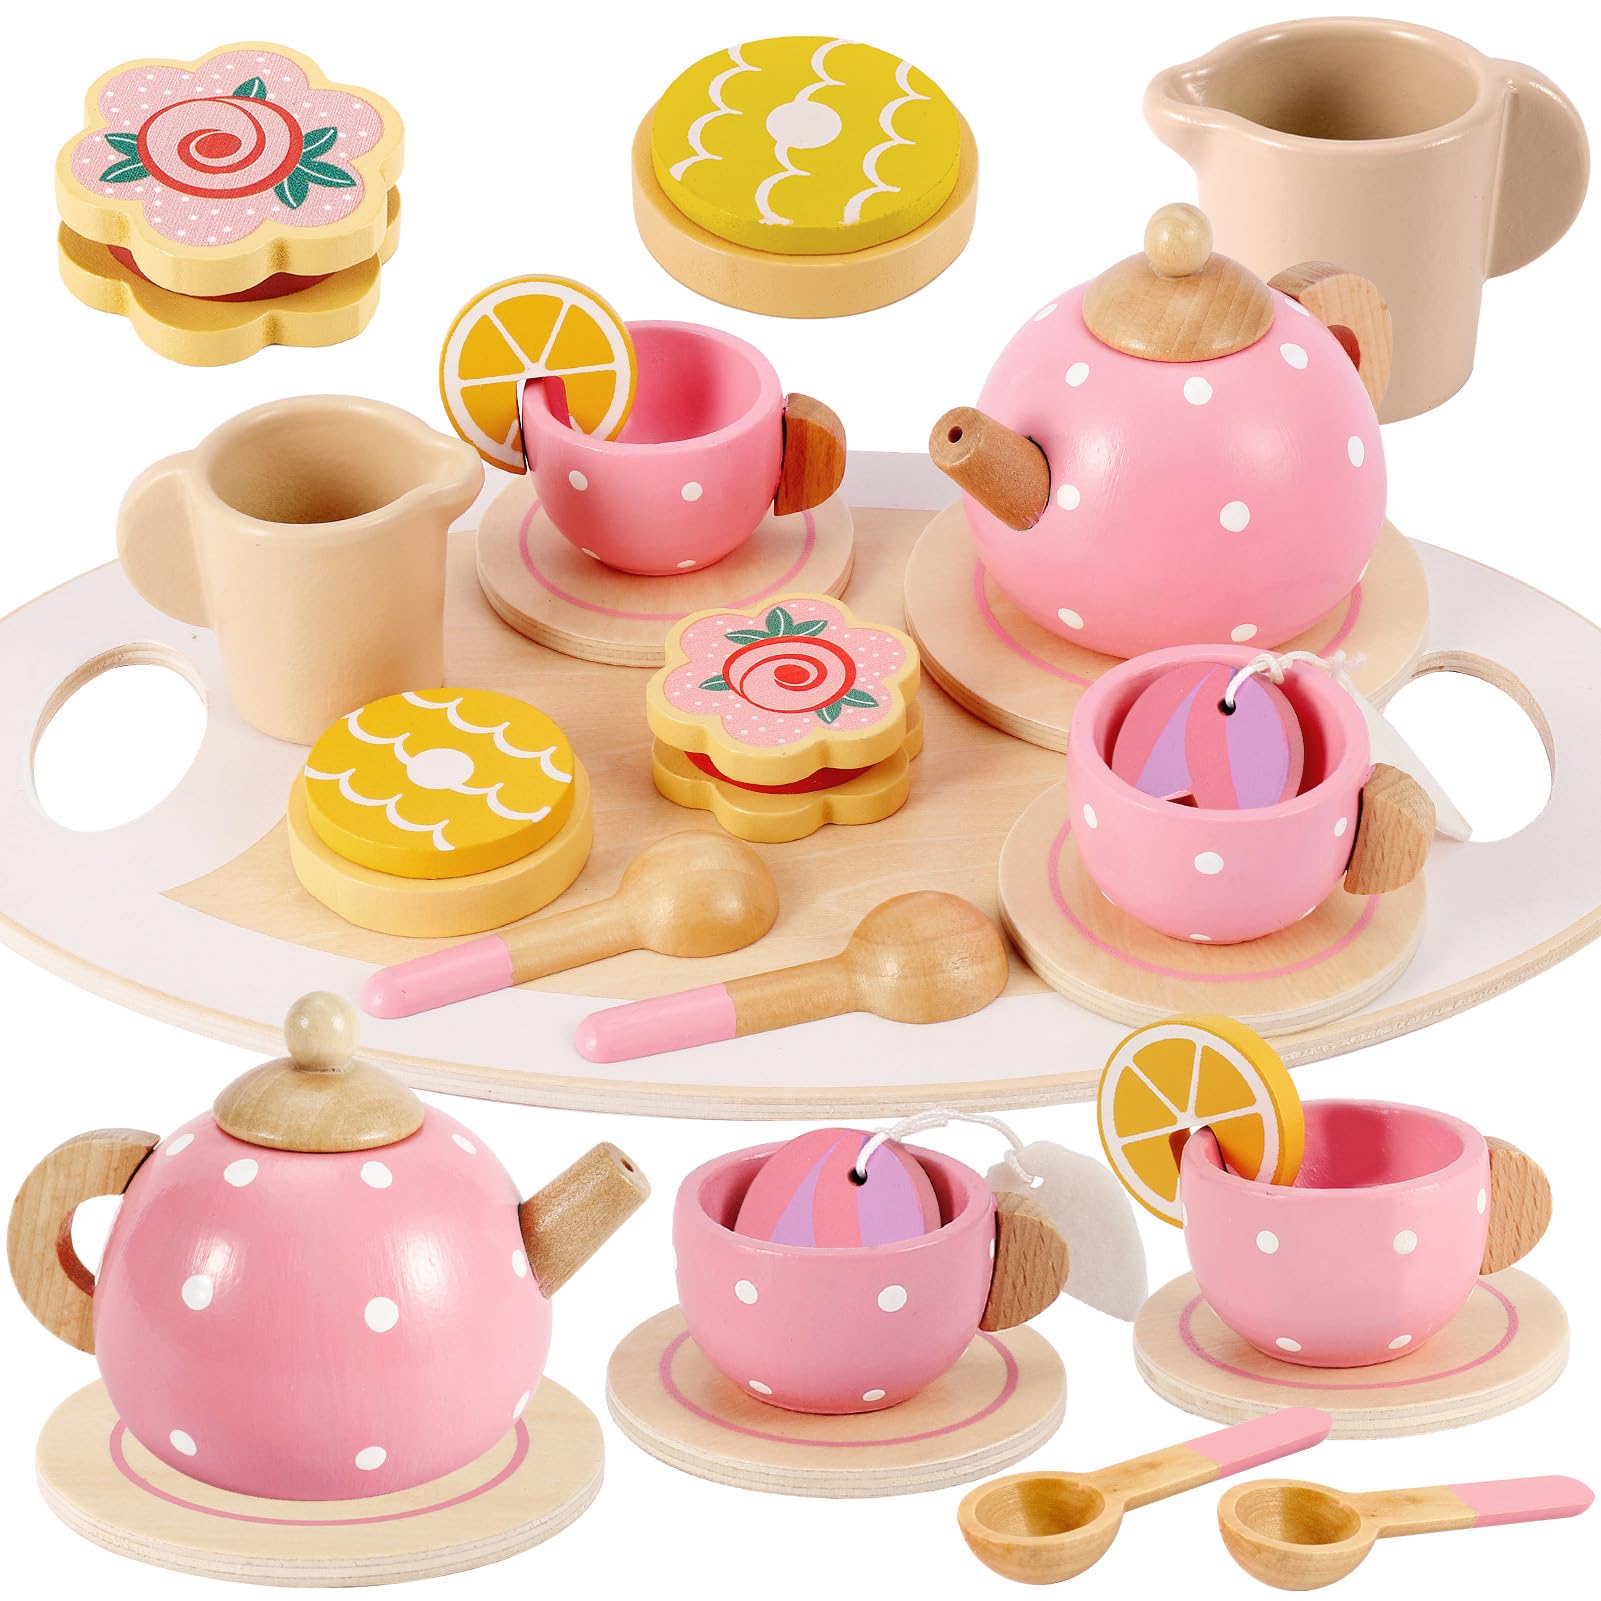 BUYGER Pretend Play Princess Tea Party Set for 3 4 5 6 + Year Old Wooden Kitchen Play Food Accessories Sets Christmas Birthday Gifts for Toddler Little Girls Boys Age 3-5